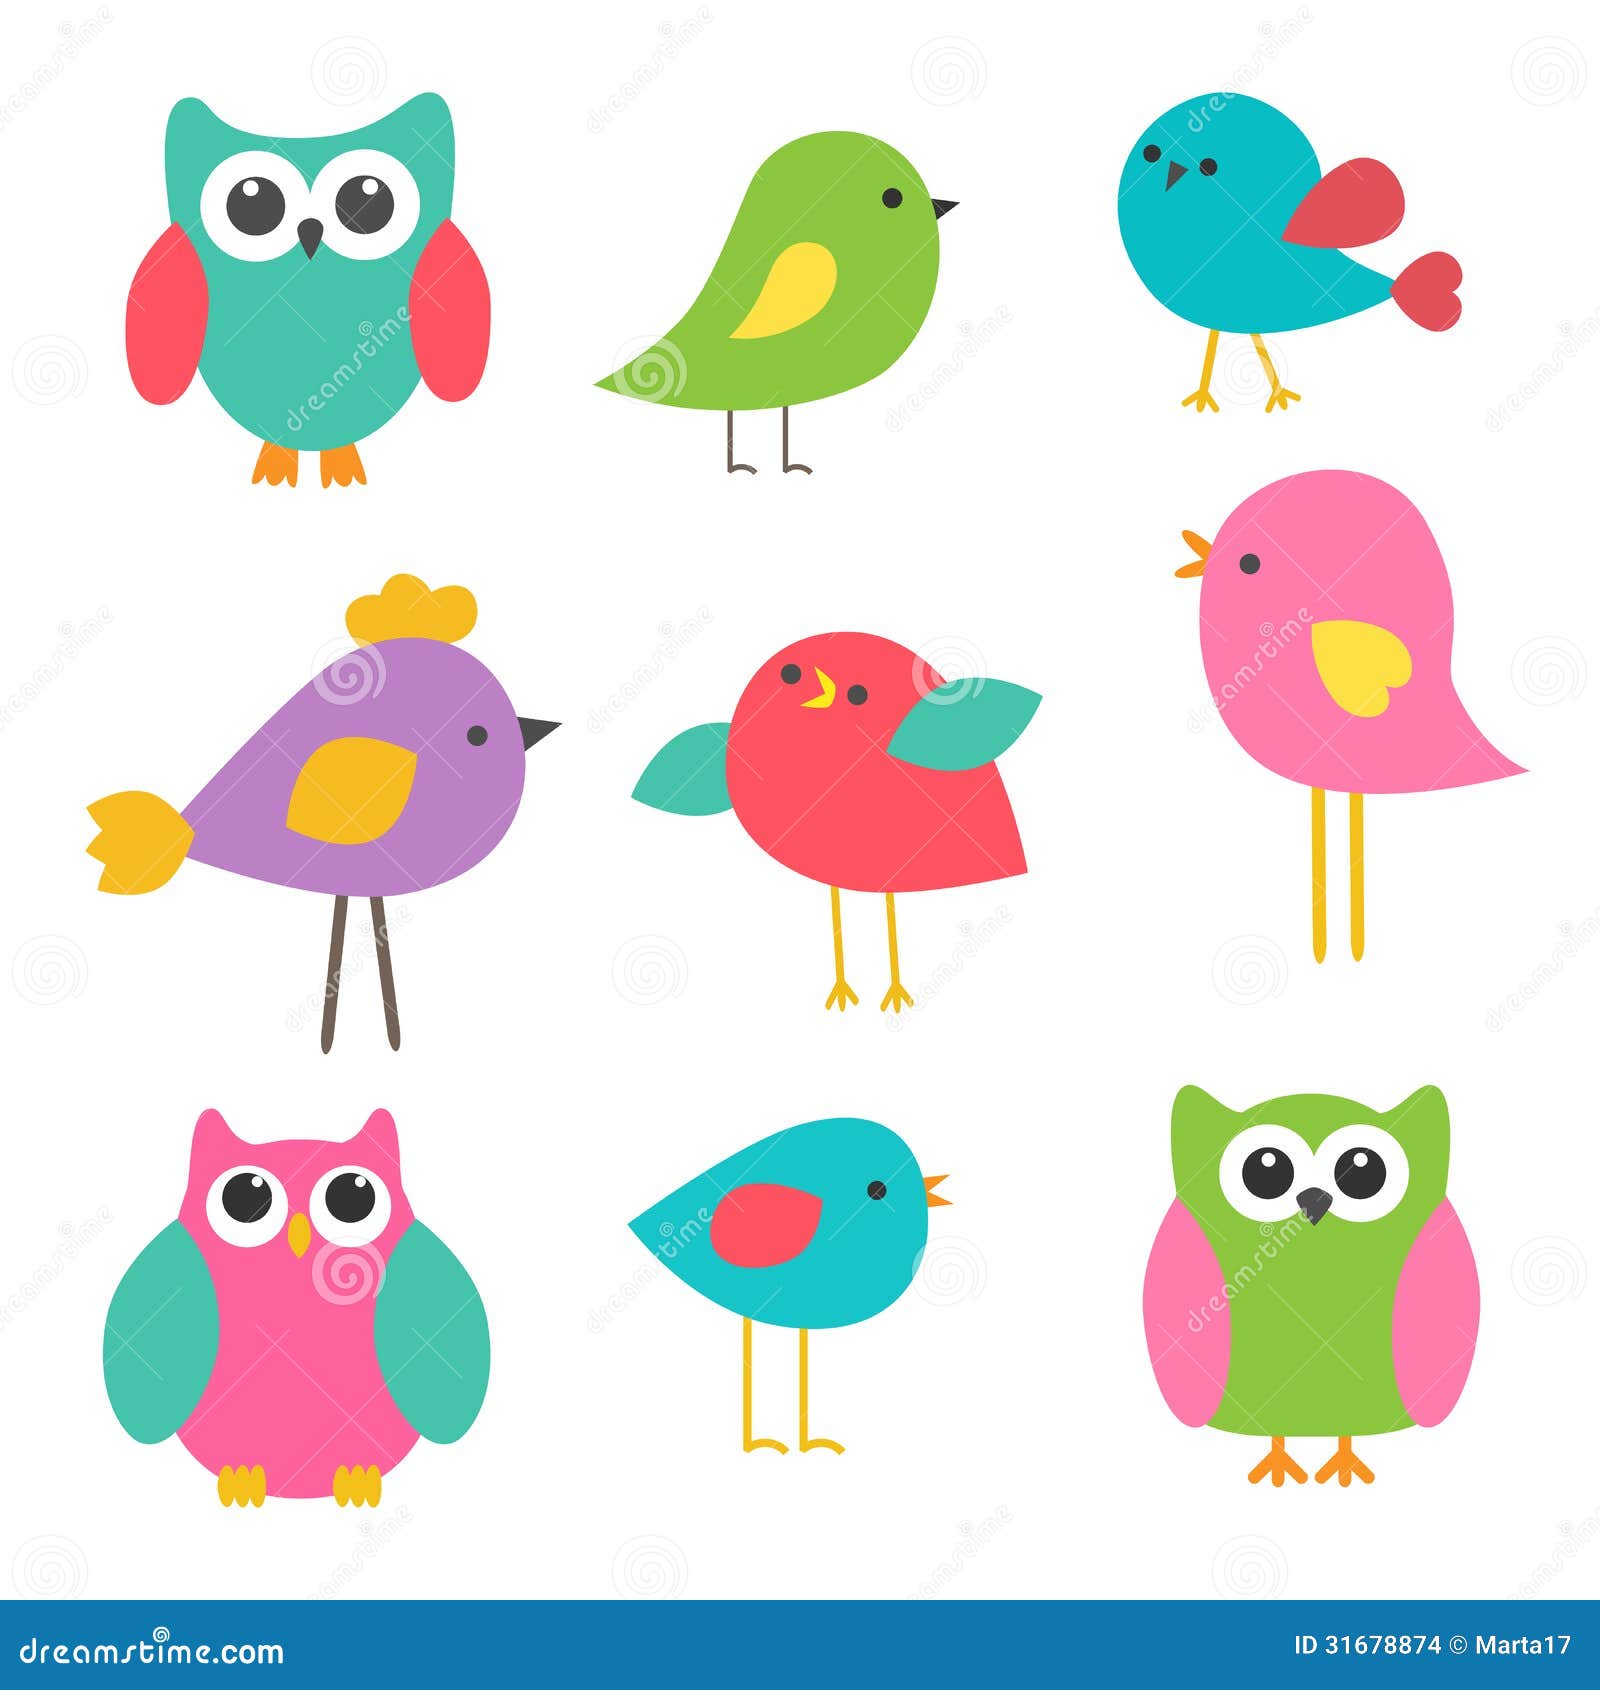 Cute birds and owls stock vector. Illustration of design - 31678874